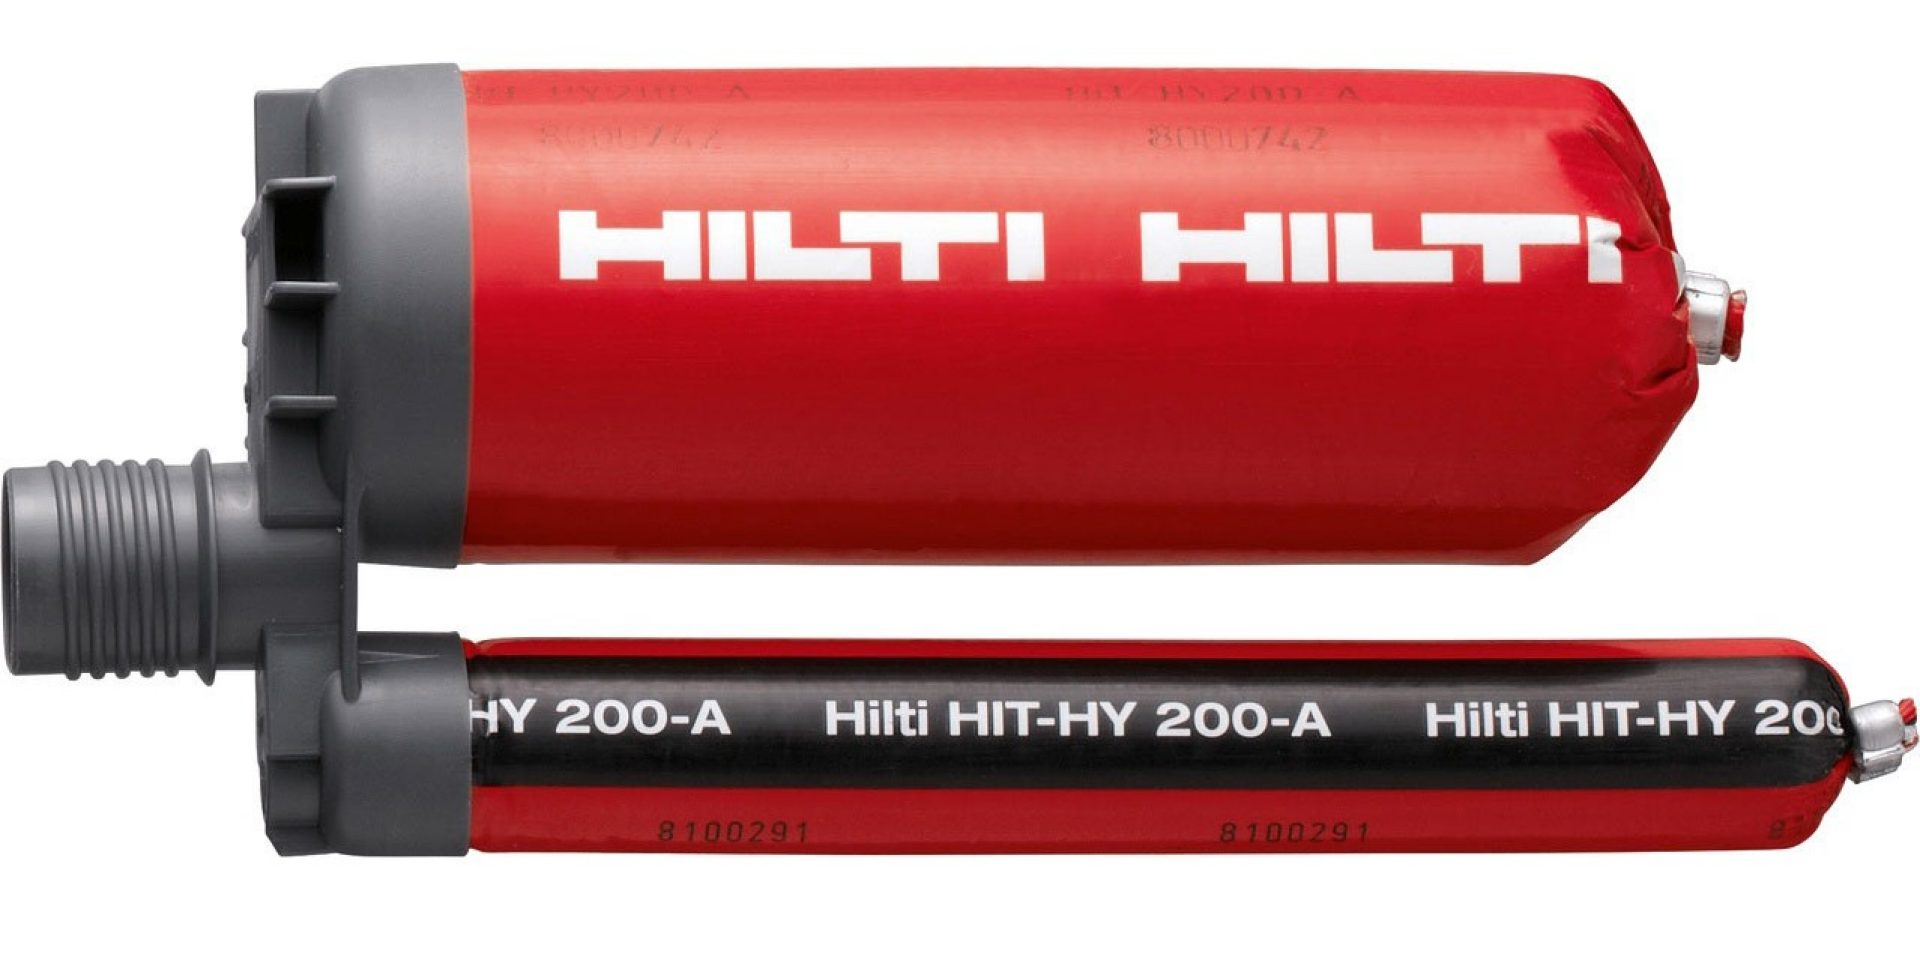 Hilti injectable mortar HIT-HY 200-R